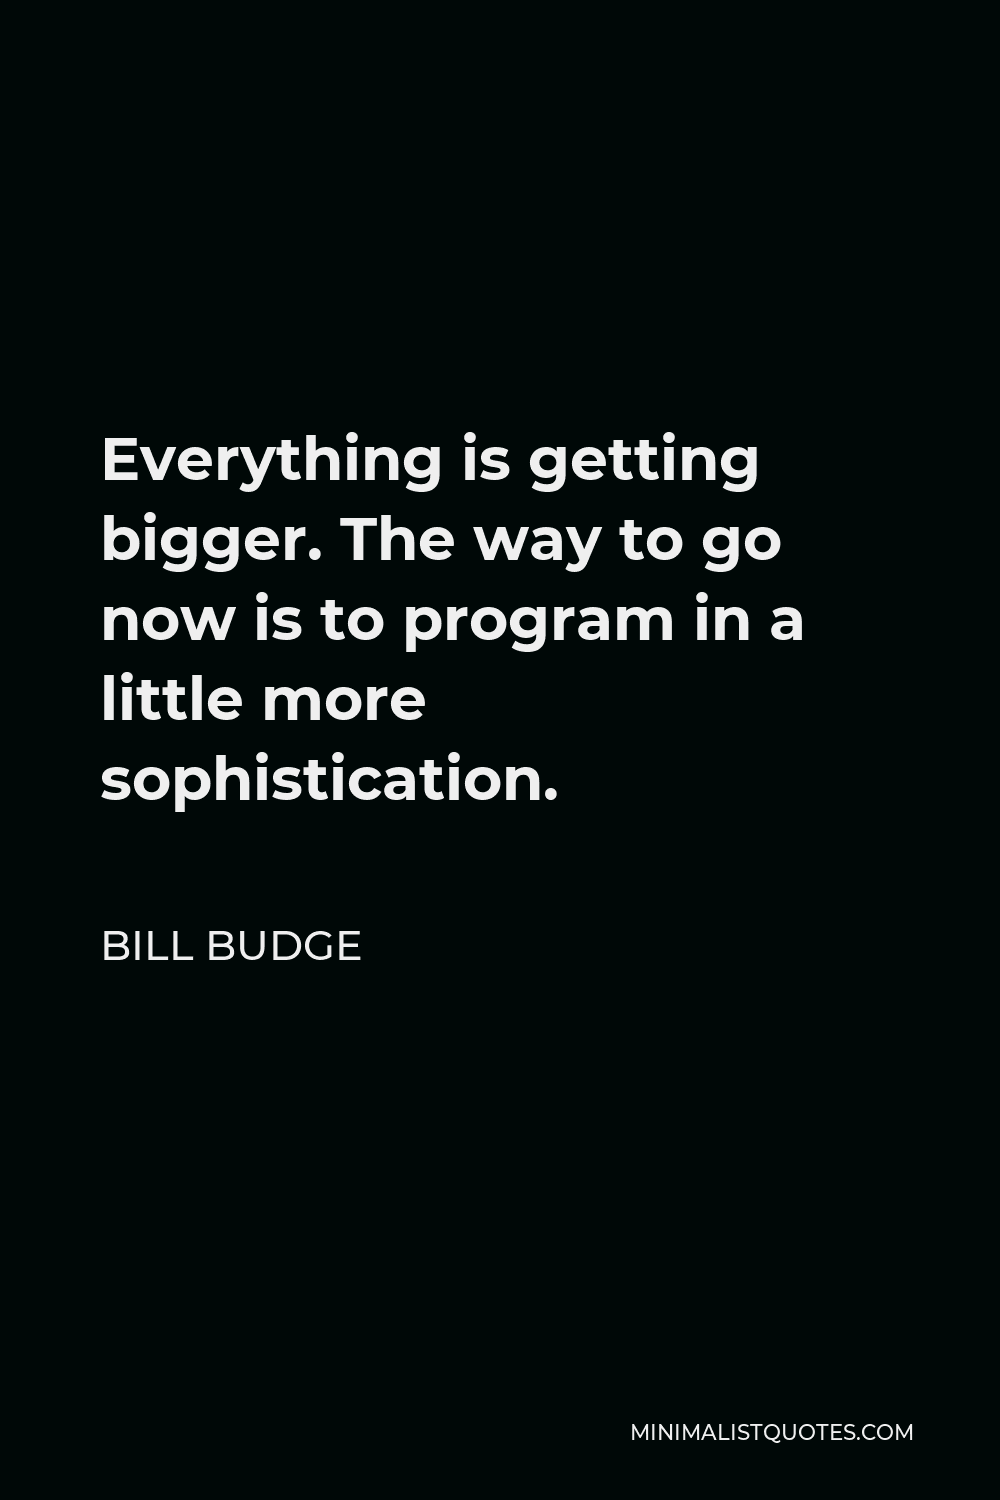 Bill Budge Quote - Everything is getting bigger. The way to go now is to program in a little more sophistication.